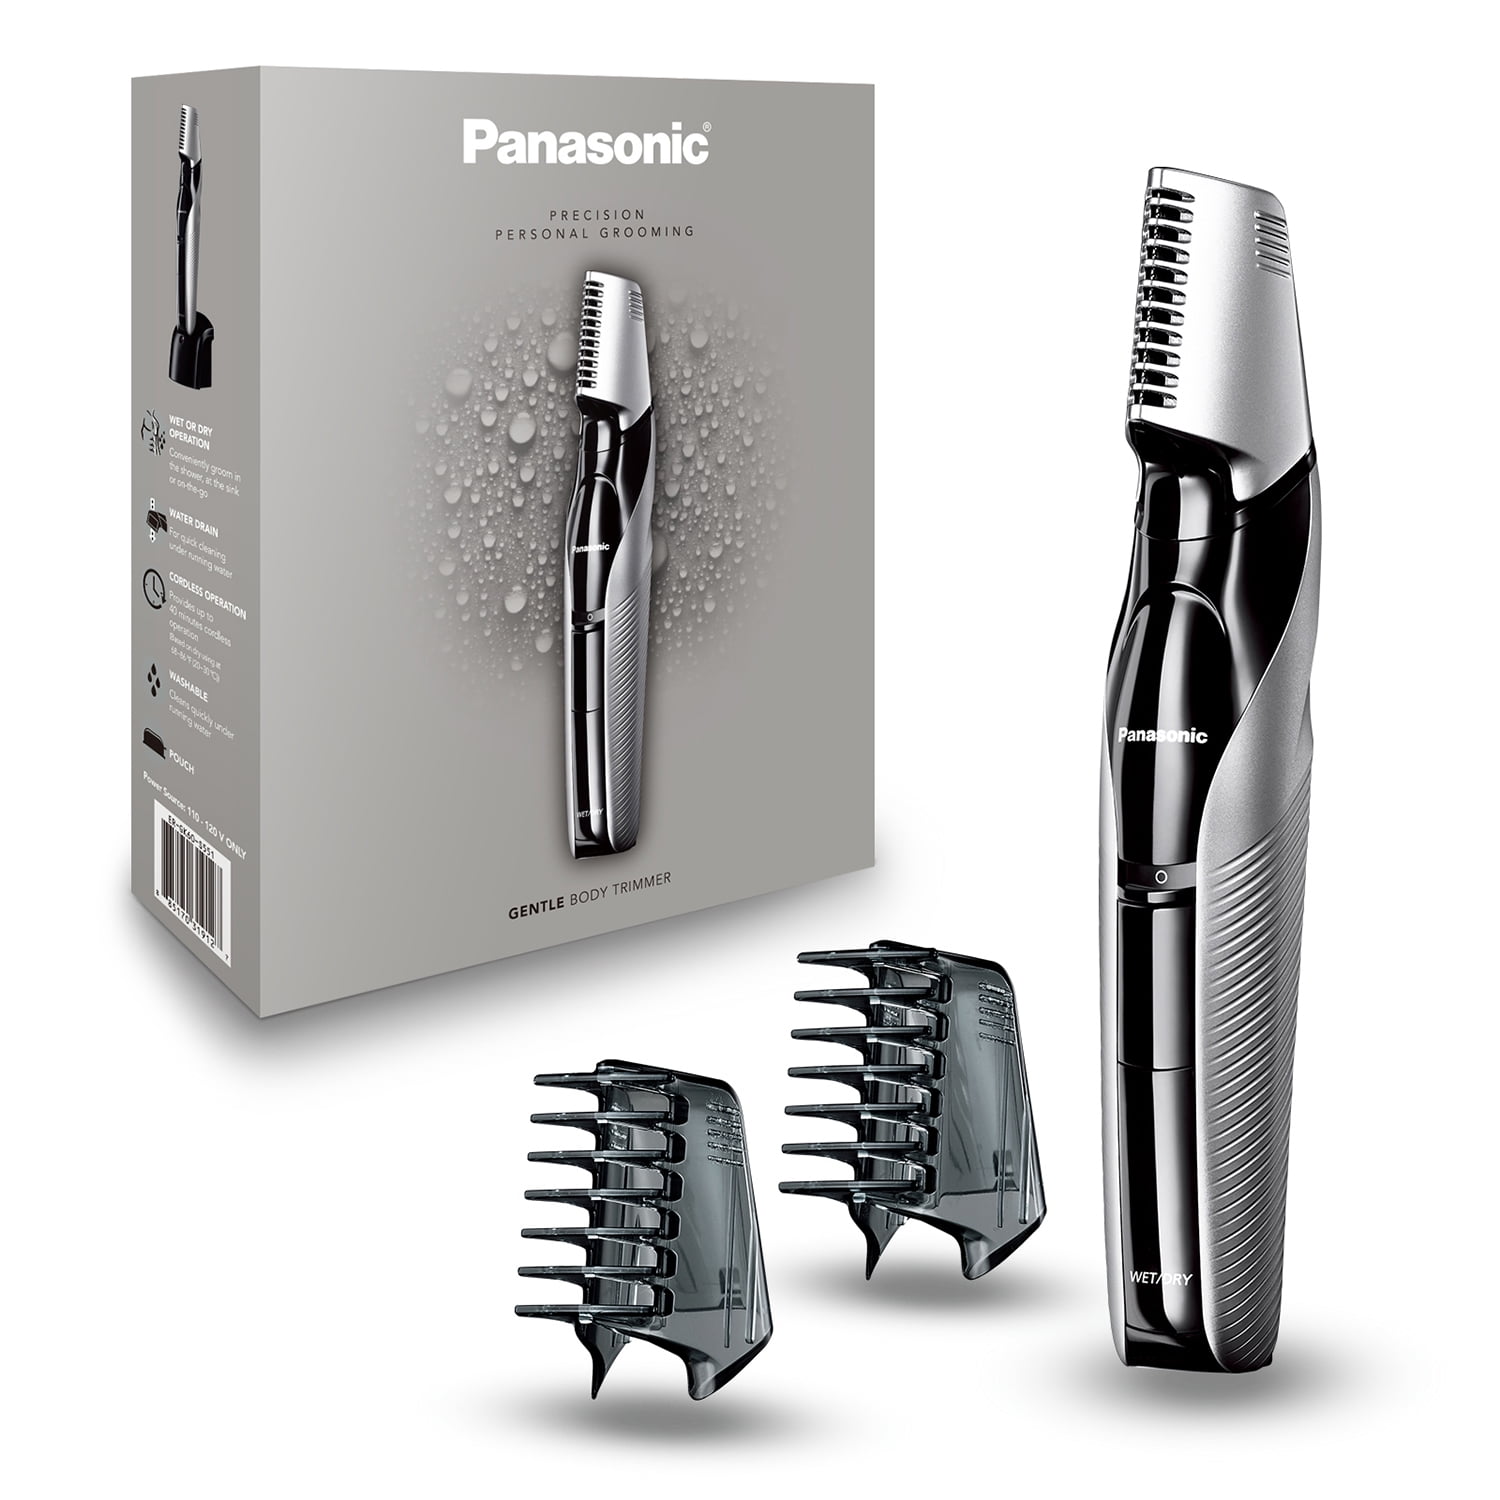 3 Body with Comb Trimmer ER-GK60-S Hair - Panasonic Attachments, Waterproof, Rechargeable V-Shaped